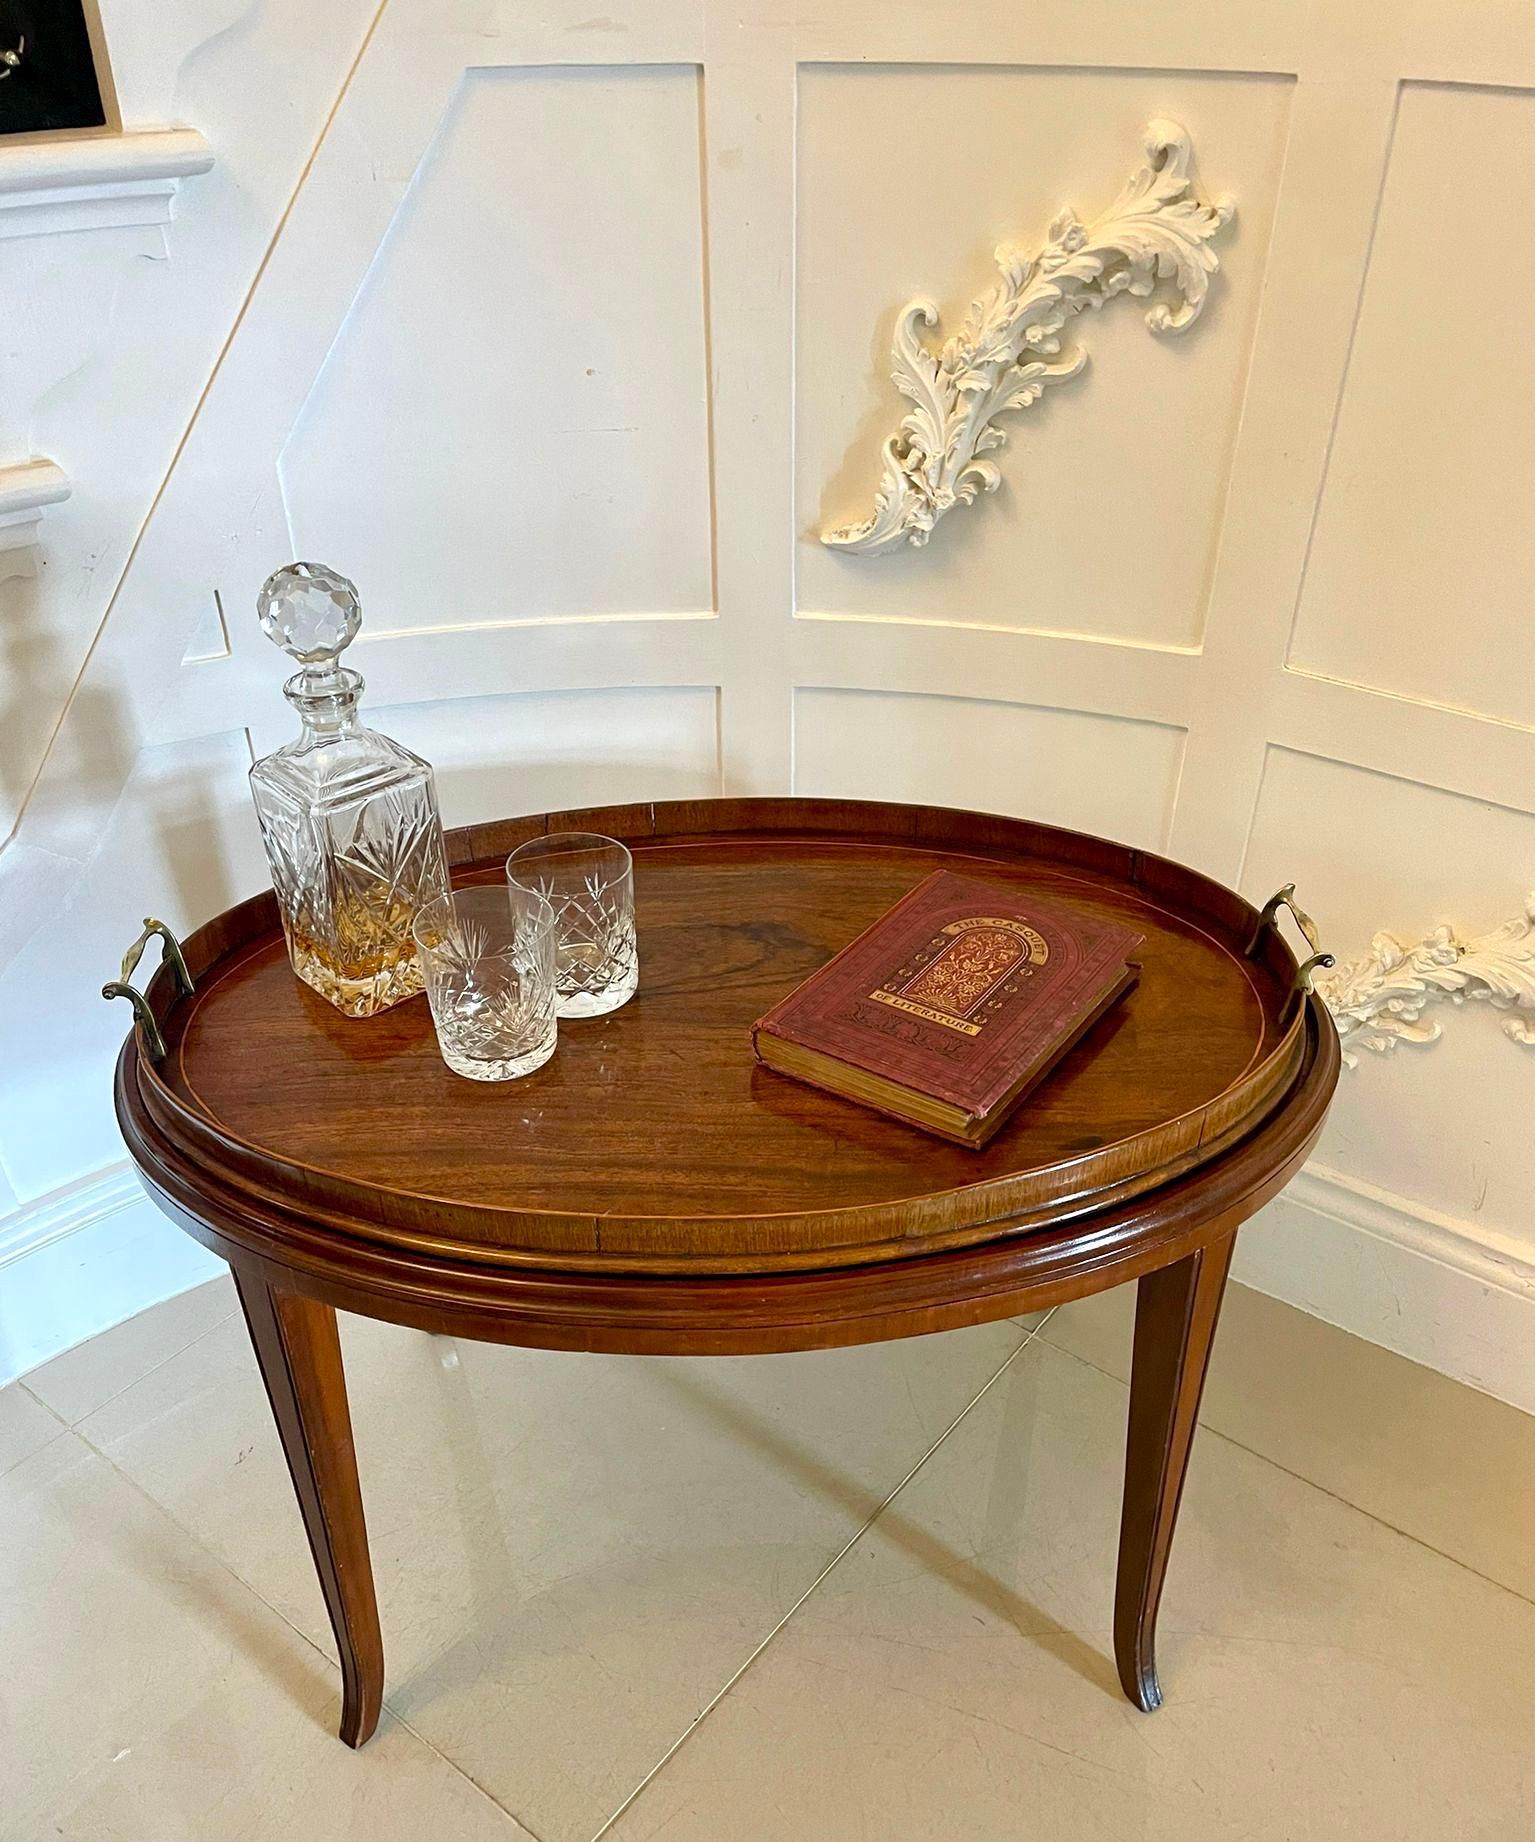 Large Antique Edwardian oval quality figured mahogany tea tray on stand having a removable quality figured mahogany oval tea tray with brass carrying handles and satinwood inlay on an oval mahogany stand with a moulded edge standing on four square